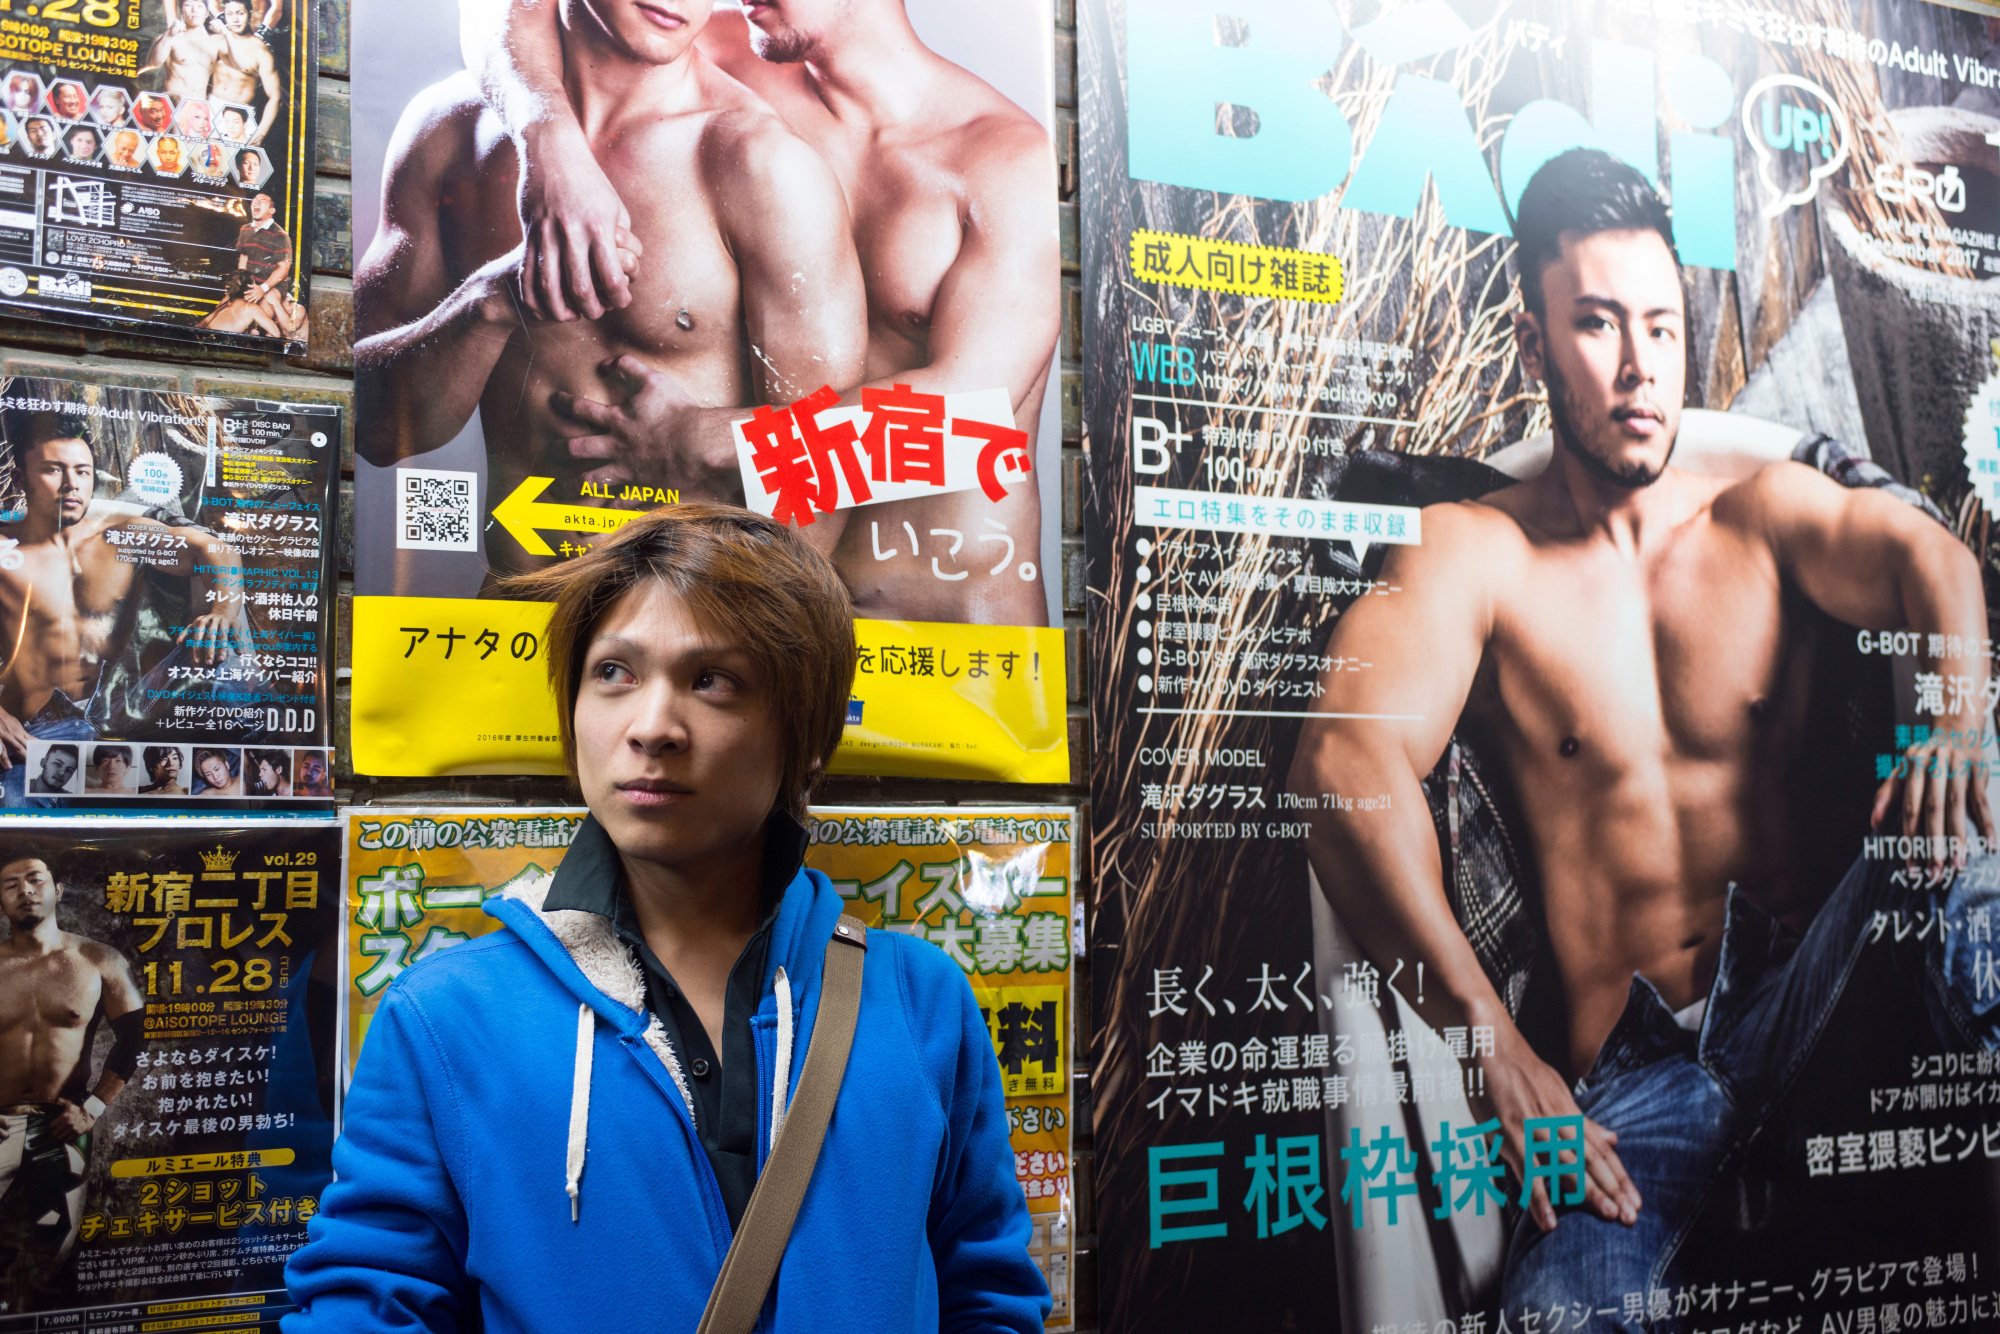 Boys for rent in Tokyo Sex, lies and vulnerable young lives pic pic